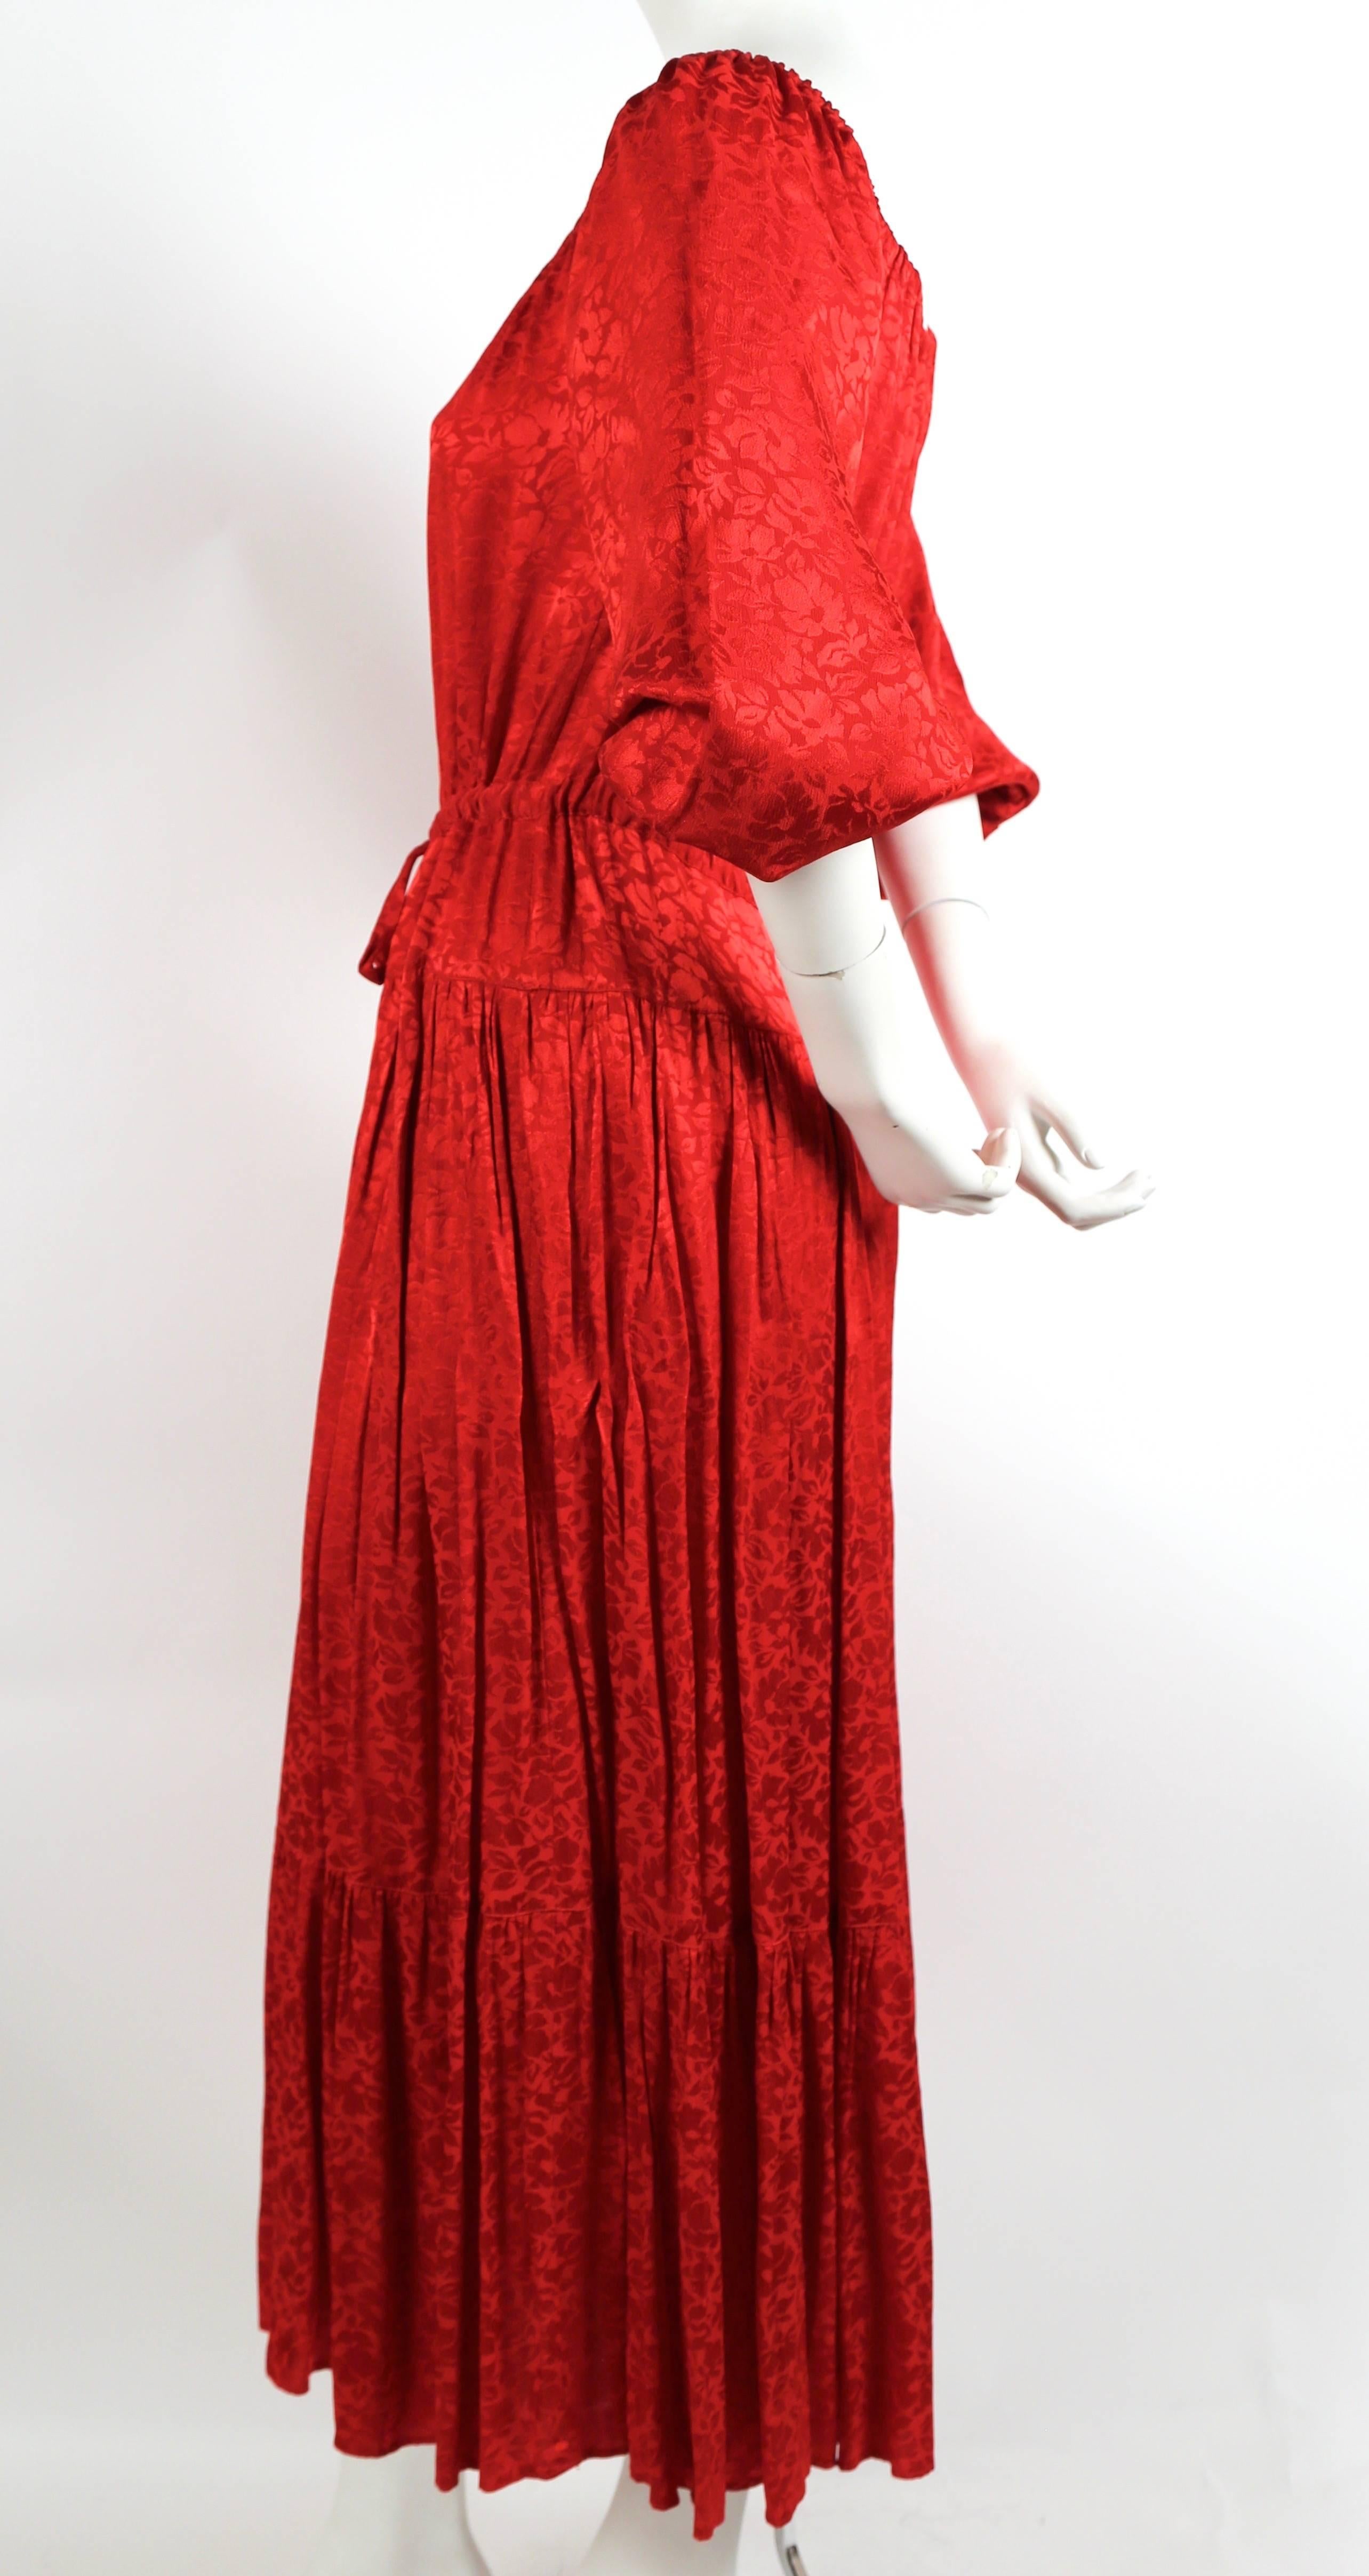 Red 1970's OSSIE CLARK red floral damask dress